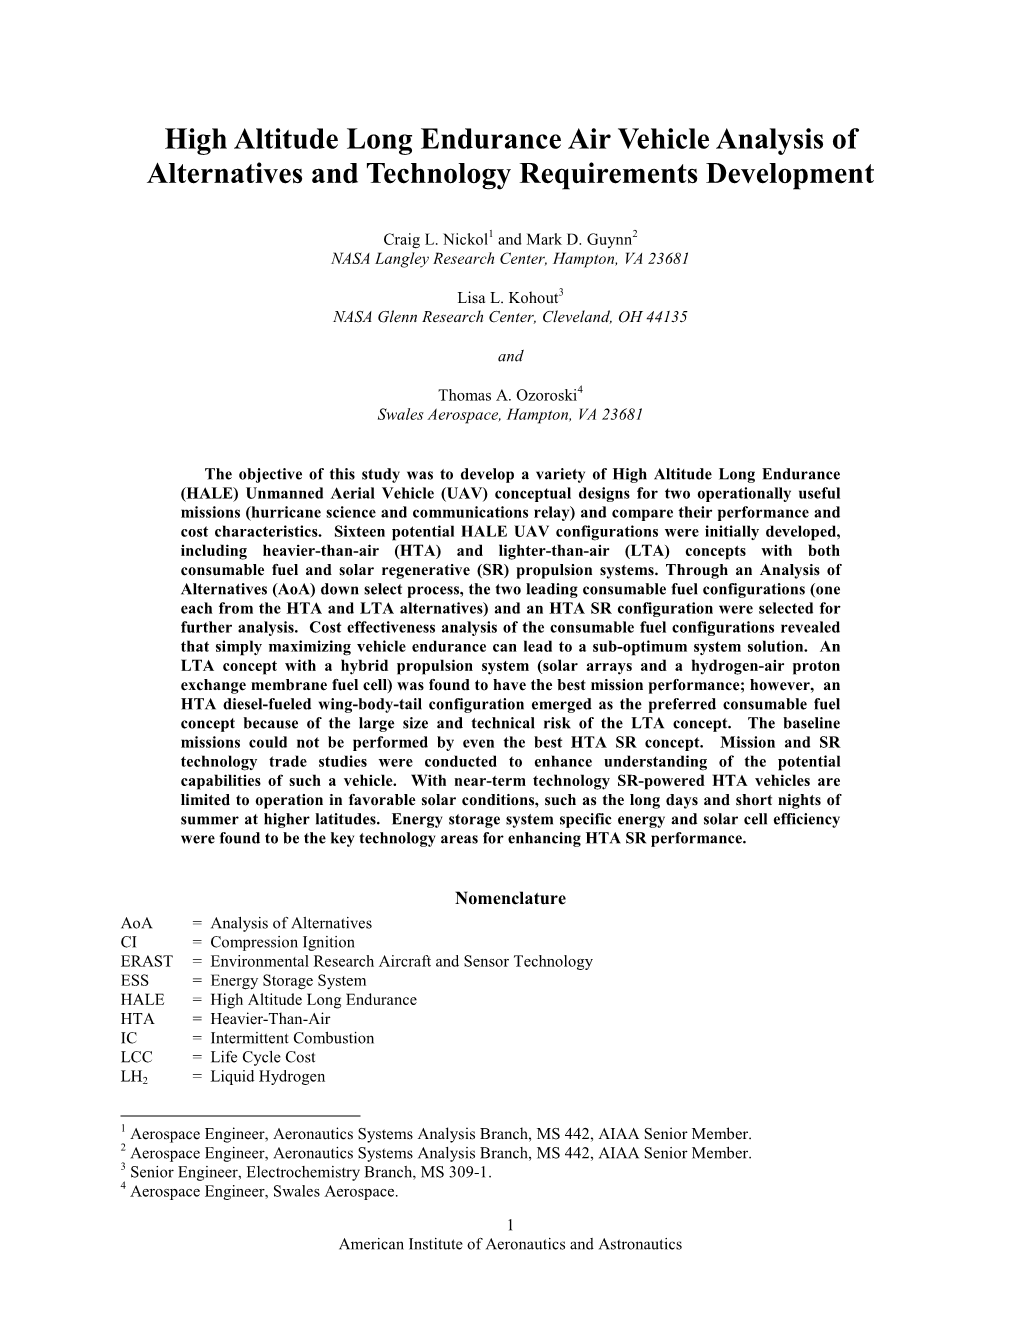 High Altitude Long Endurance Air Vehicle Analysis of Alternatives and Technology Requirements Development